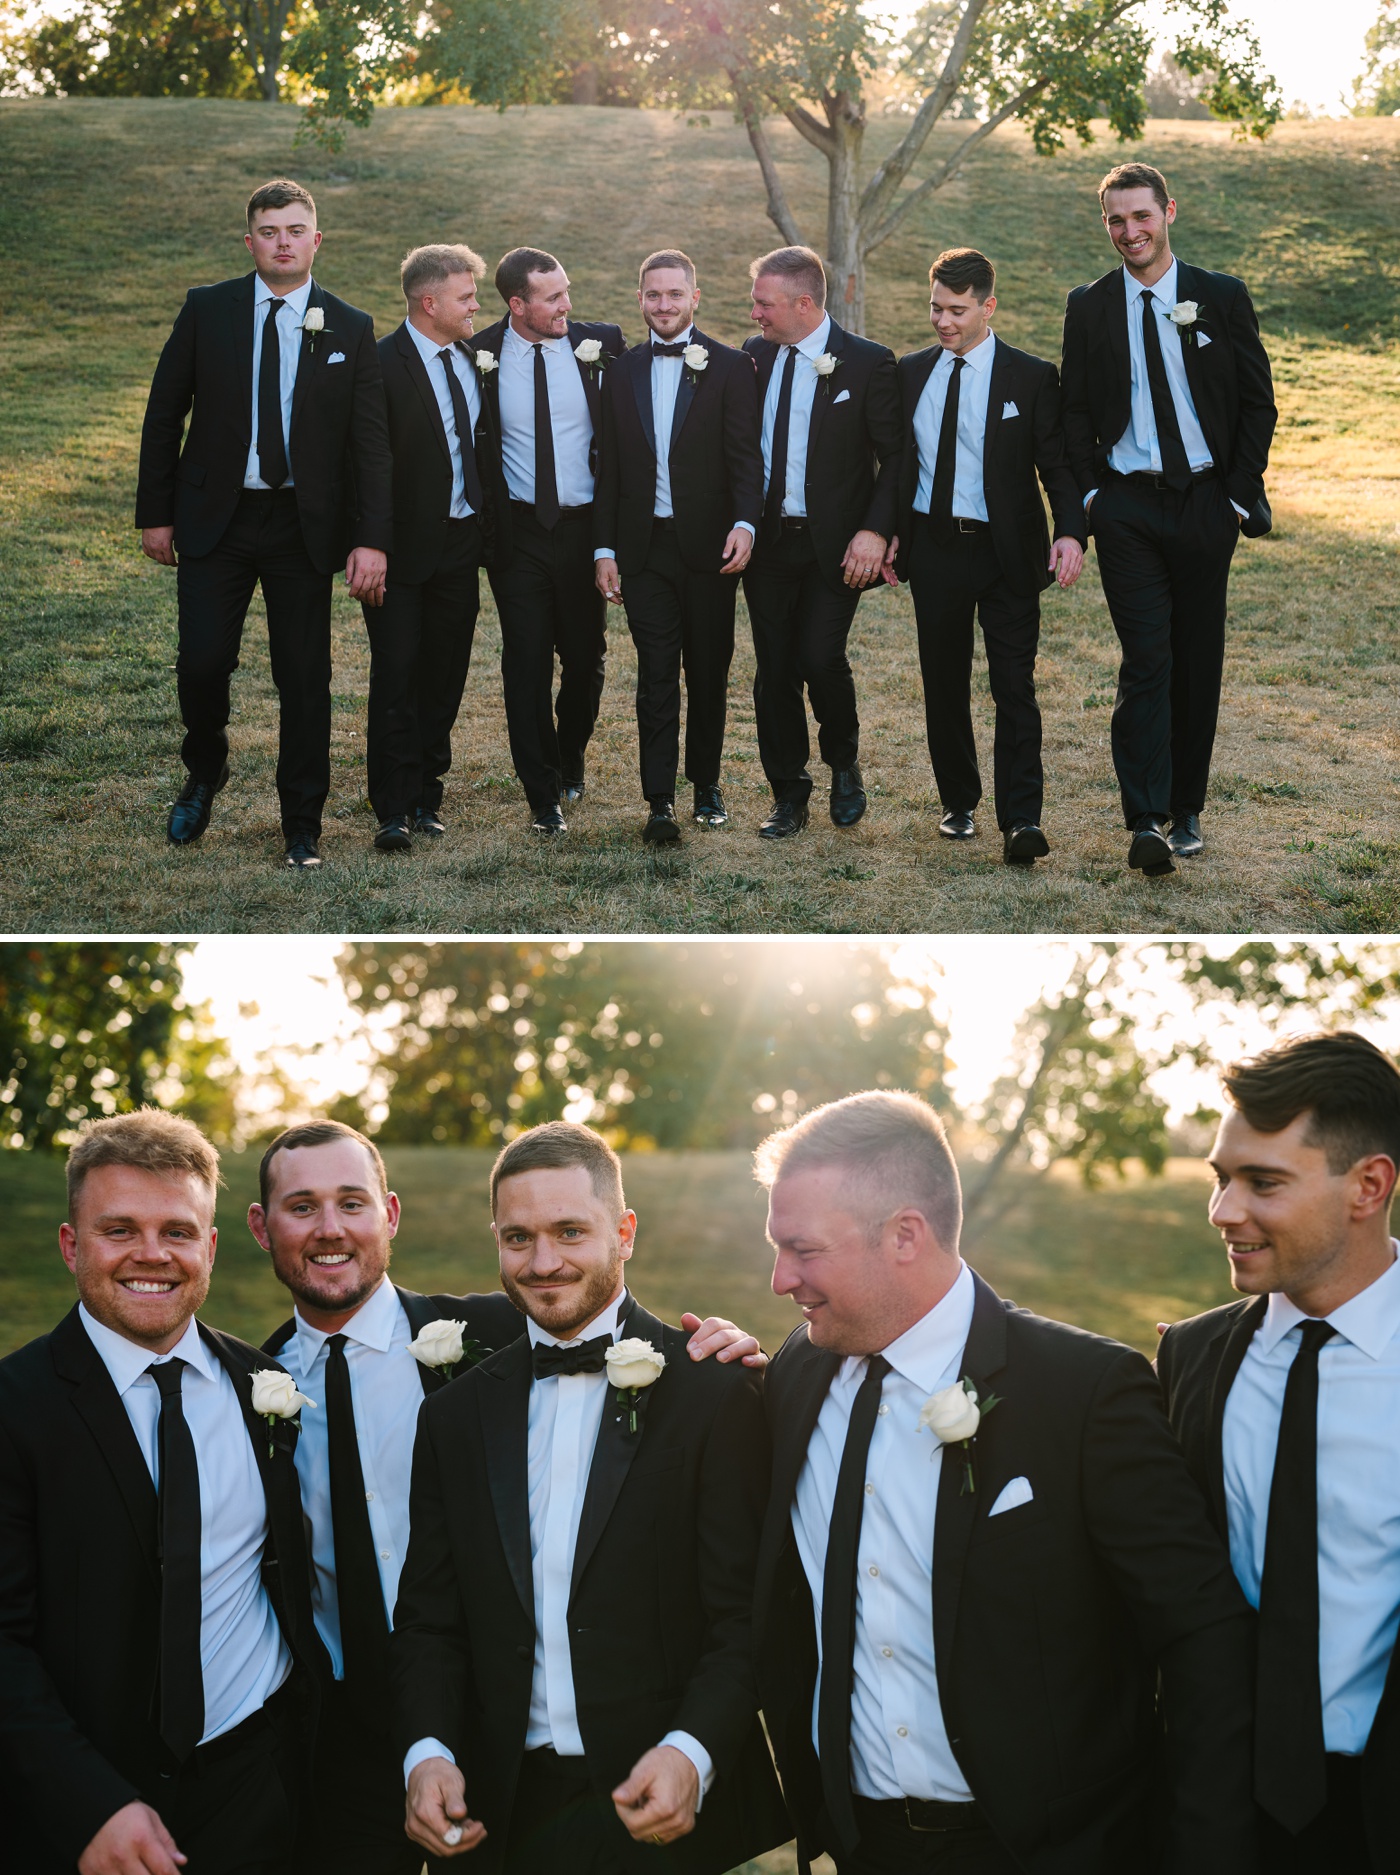 Bridal party portraits at Garfield Park in Indianapolis, IN